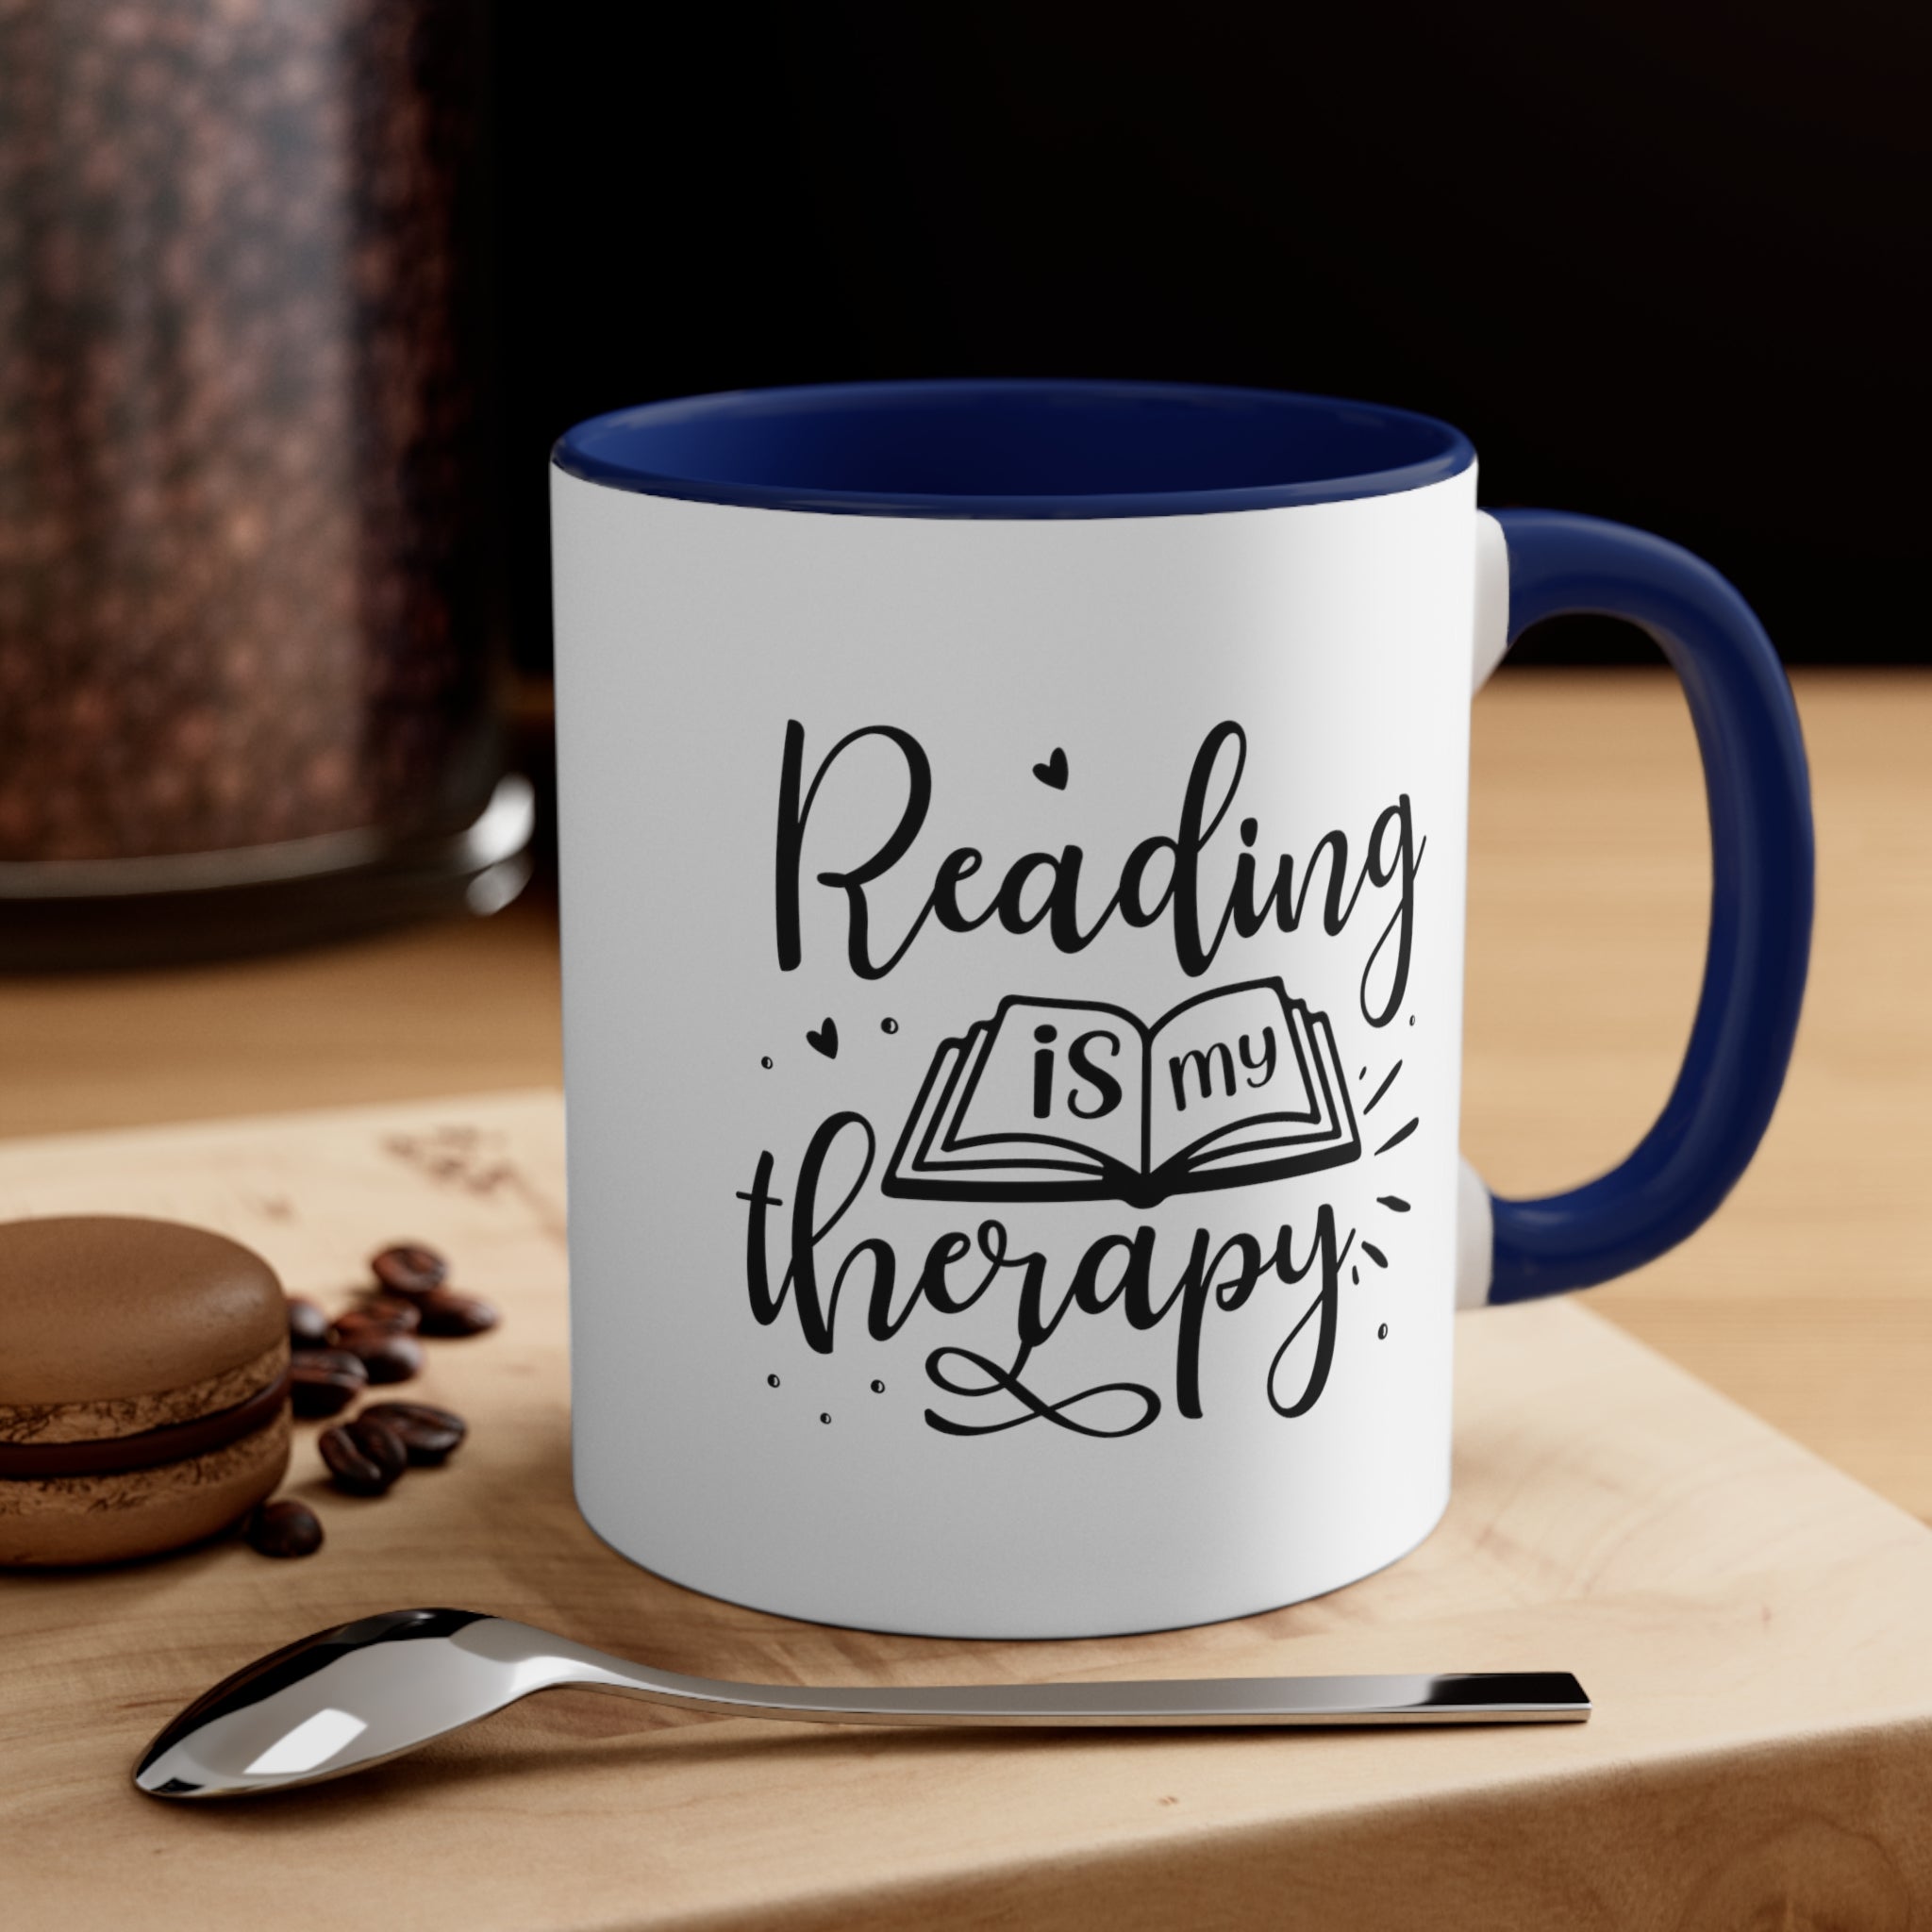 Reading Is My Therapy Coffee Mug, 11oz Bookworm Book Worm Book Reader Joke Humour Humor Birthday Christmas Valentine's Gift Cup